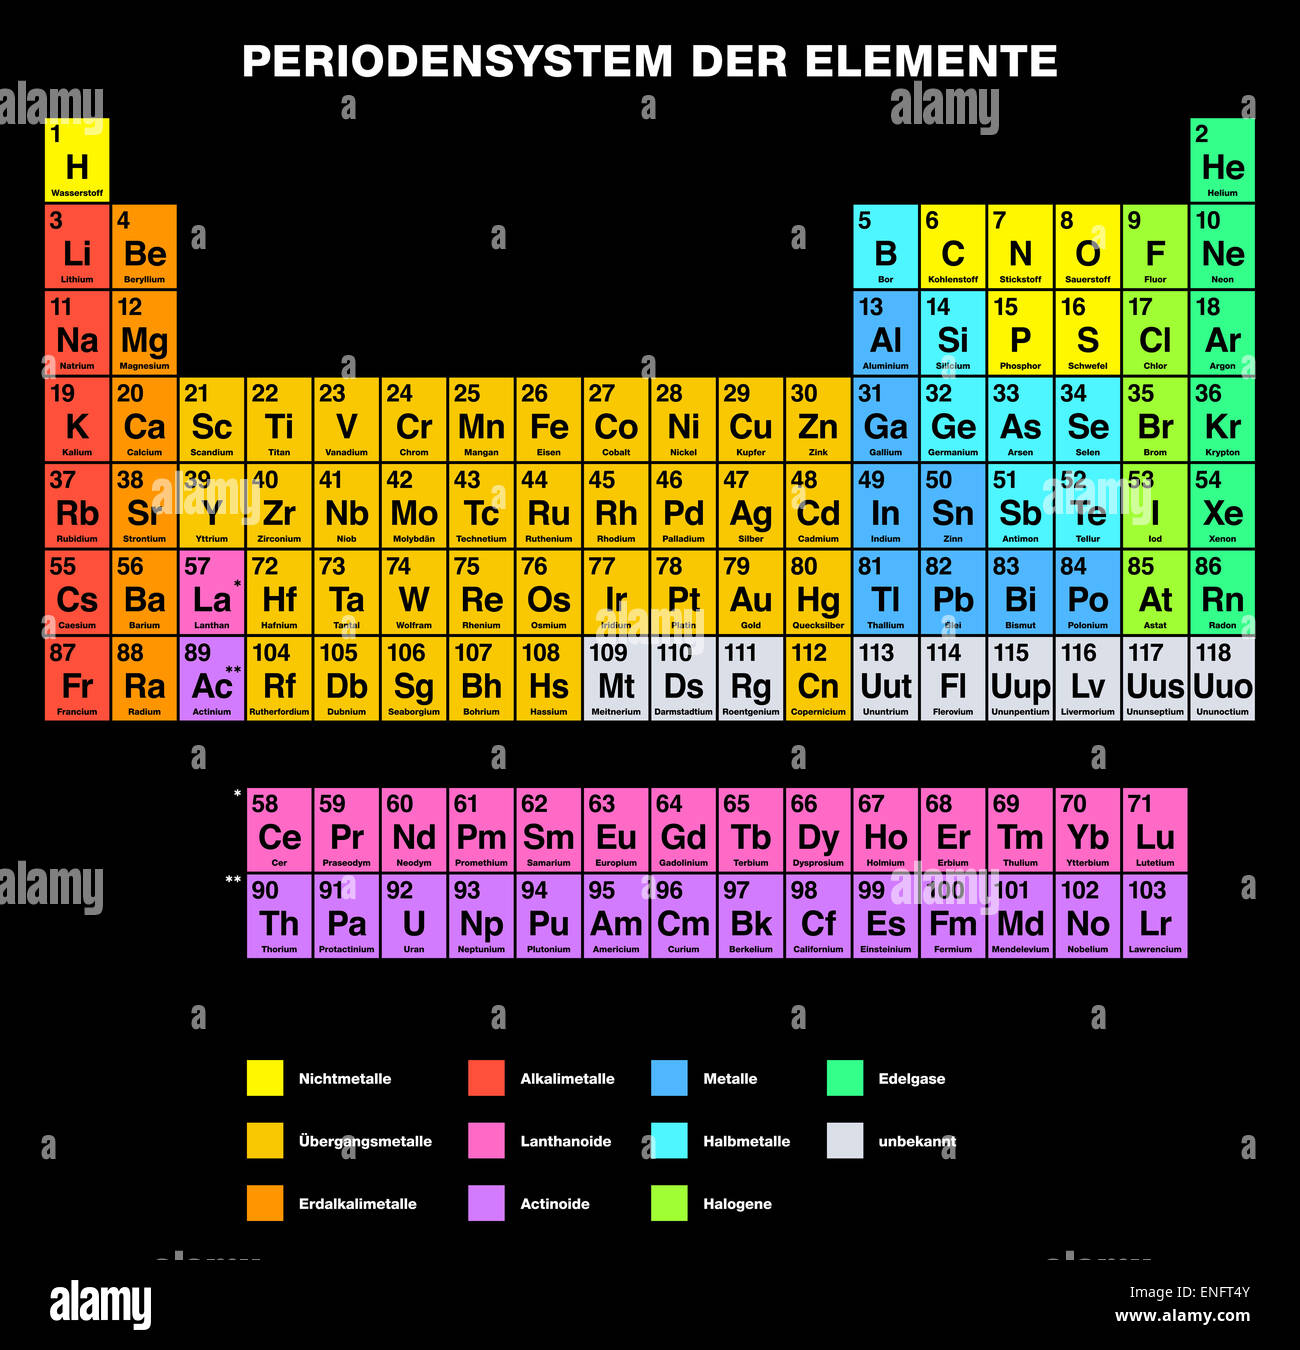 Periodic Table of the Elements GERMAN Labeling Stock Photo